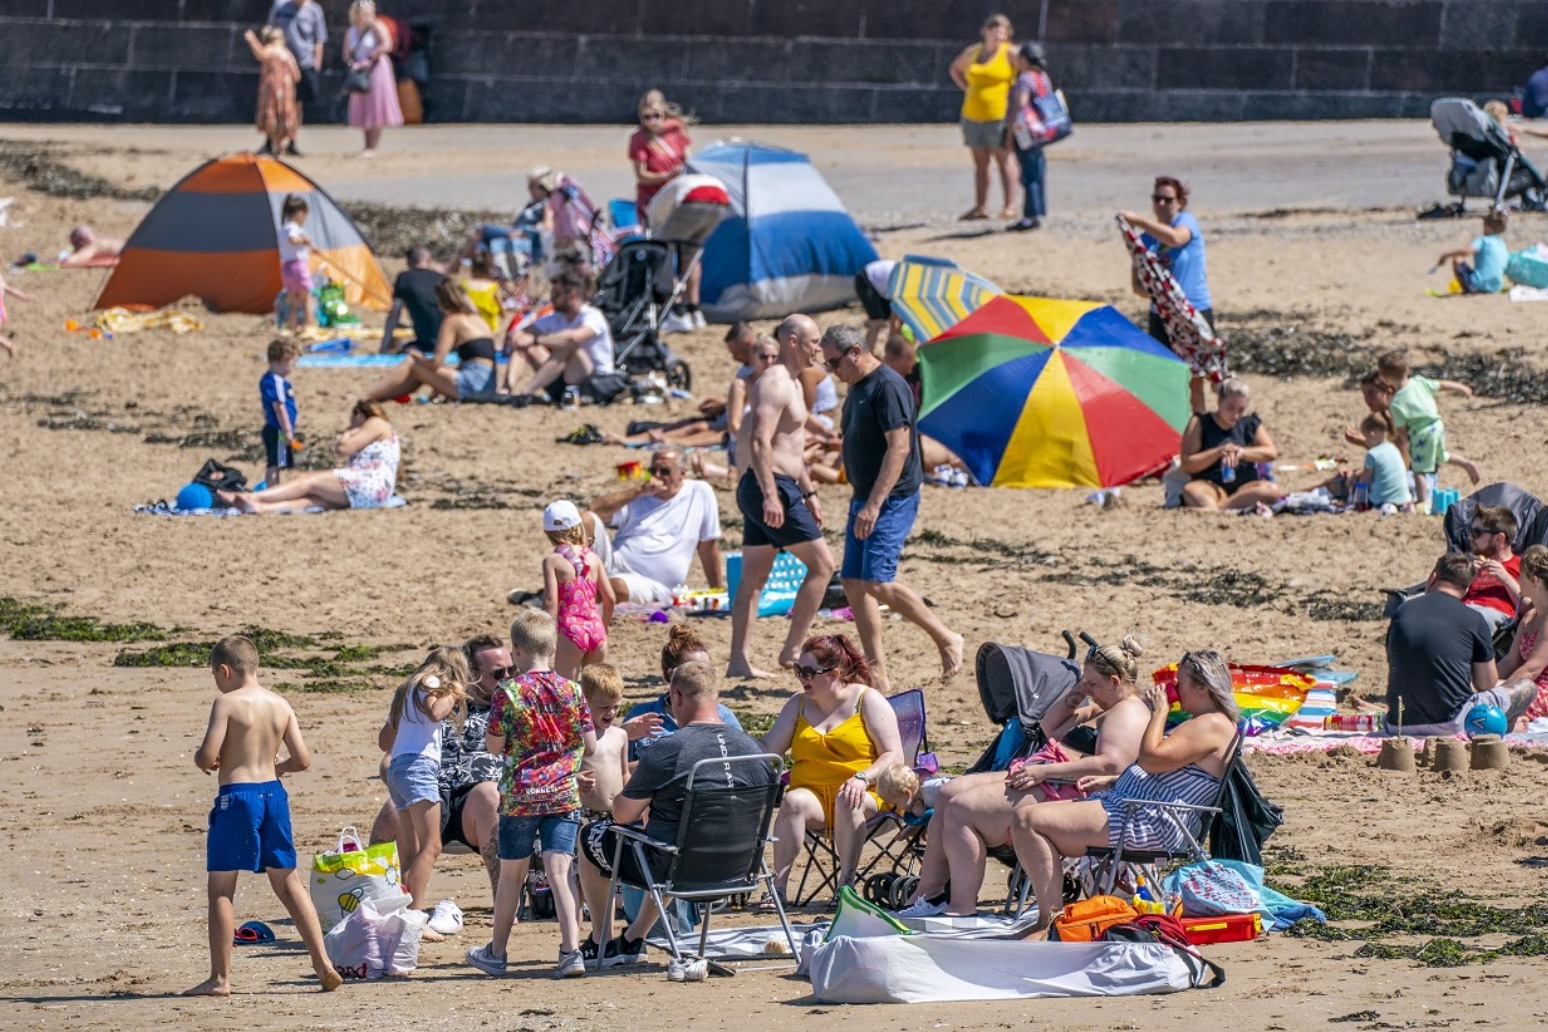 UK ‘to hit 40C on regular basis even if global warming is limited to 1.5C’ 